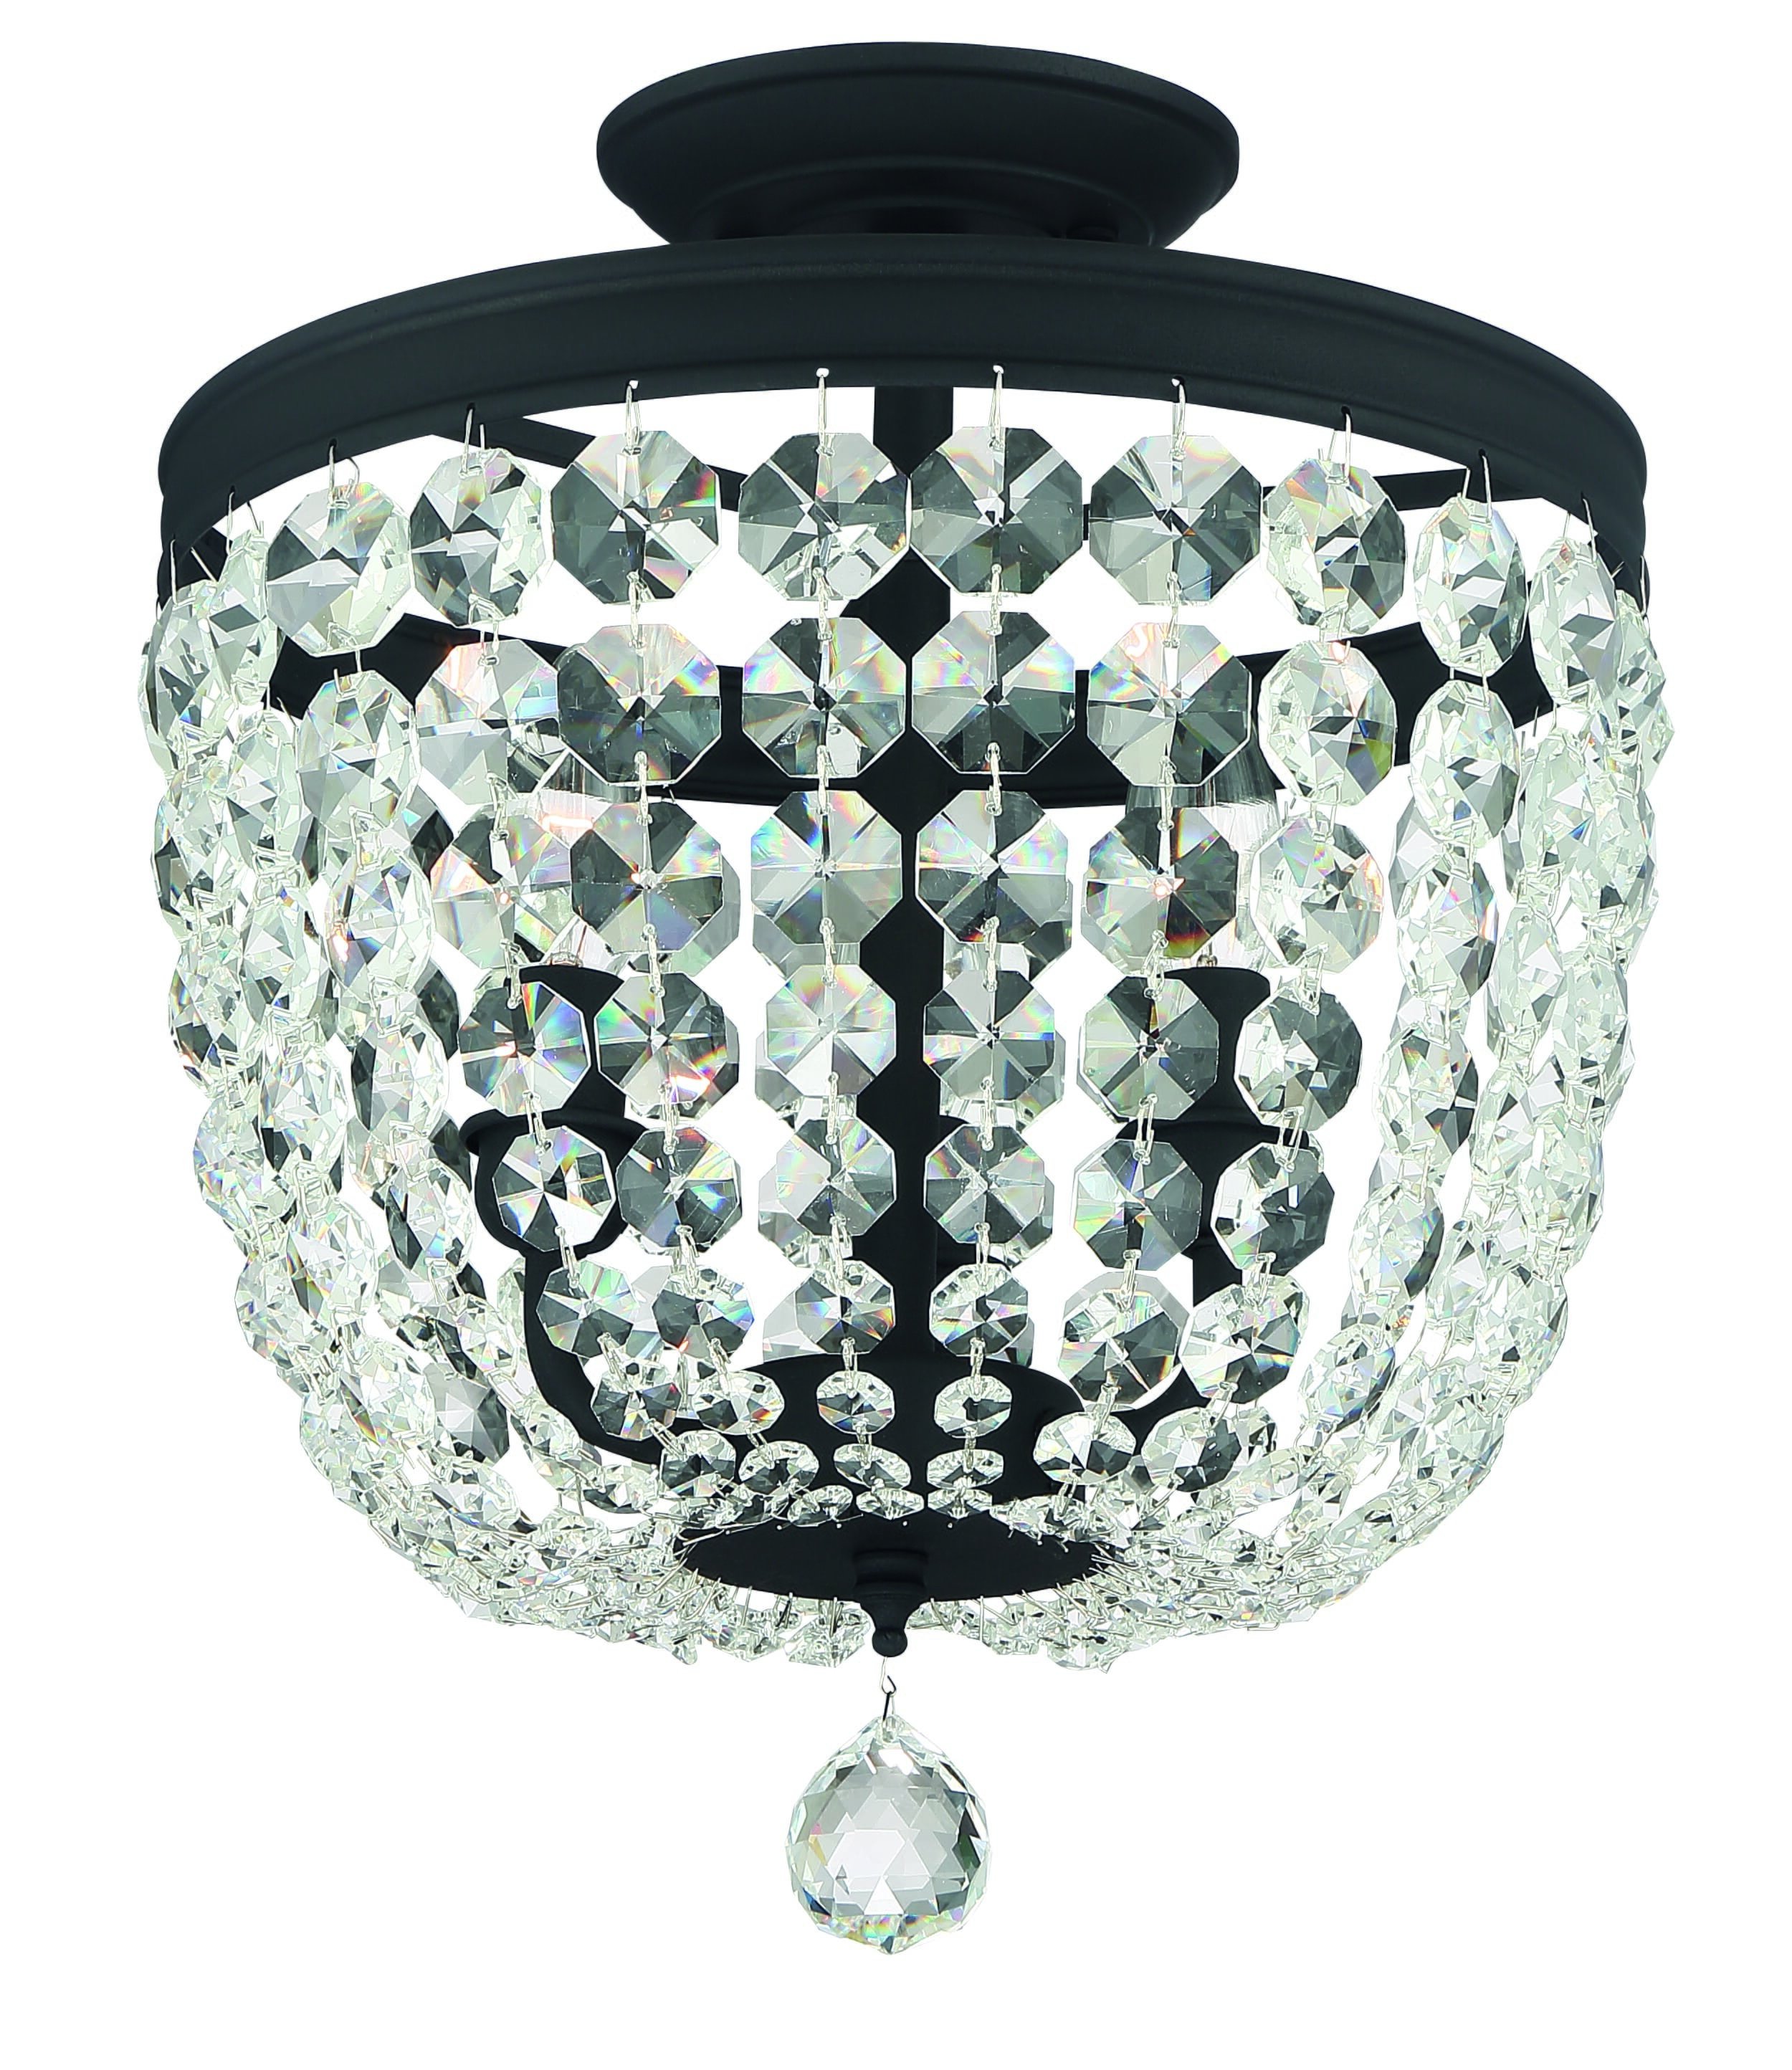 Archer 3-Light 12" Ceiling Light in Black Forged with Clear Hand Cut Crystals